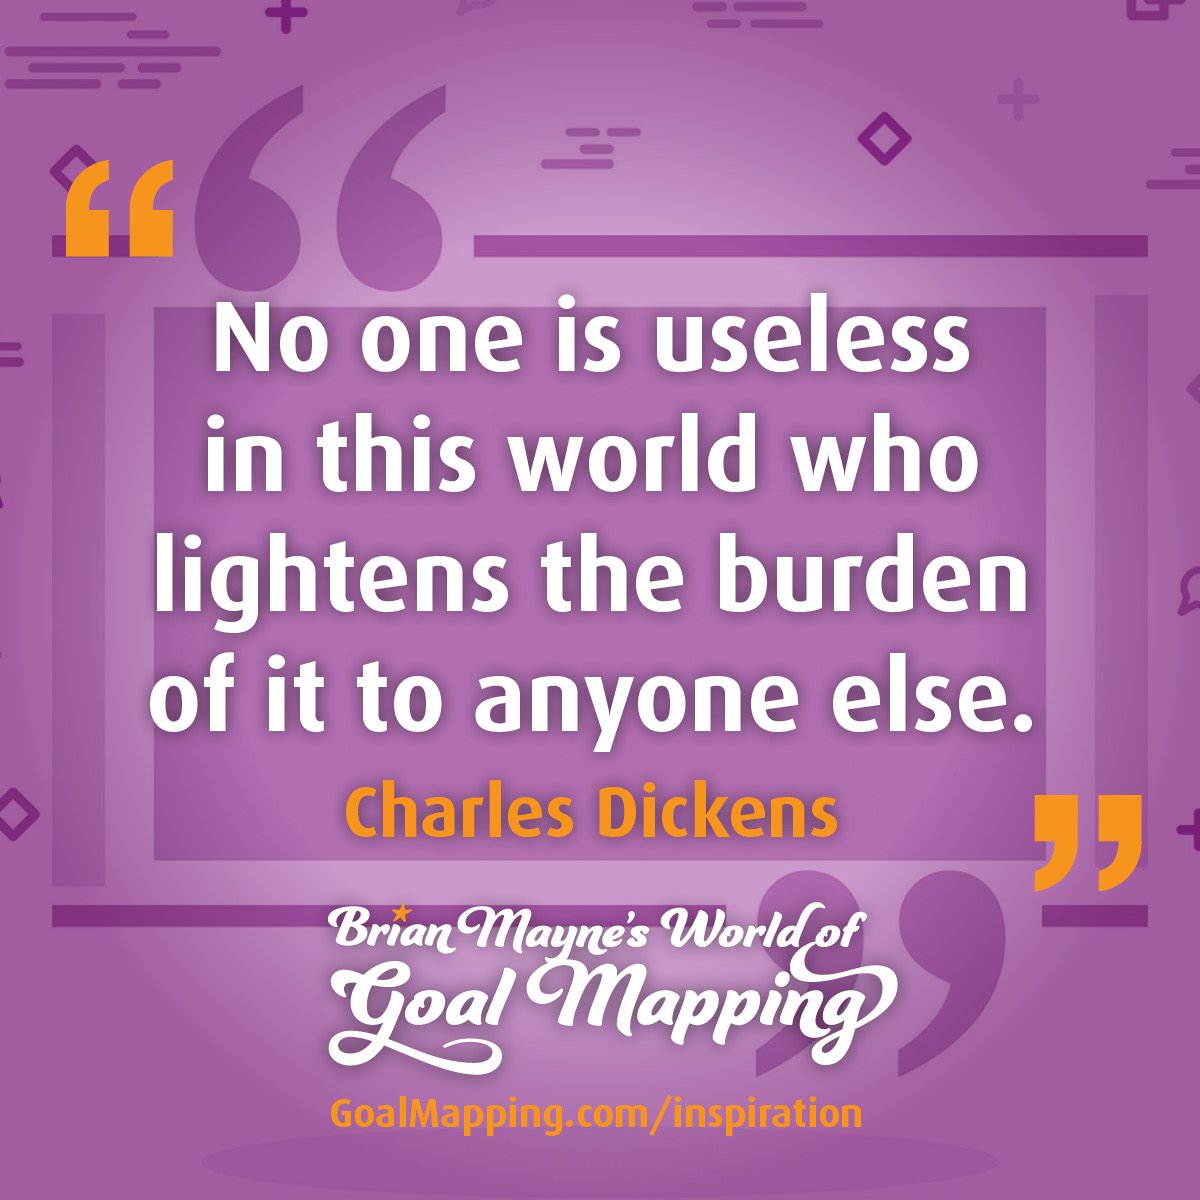 "No one is useless in this world who lightens the burden of it to anyone else."  Charles Dickens